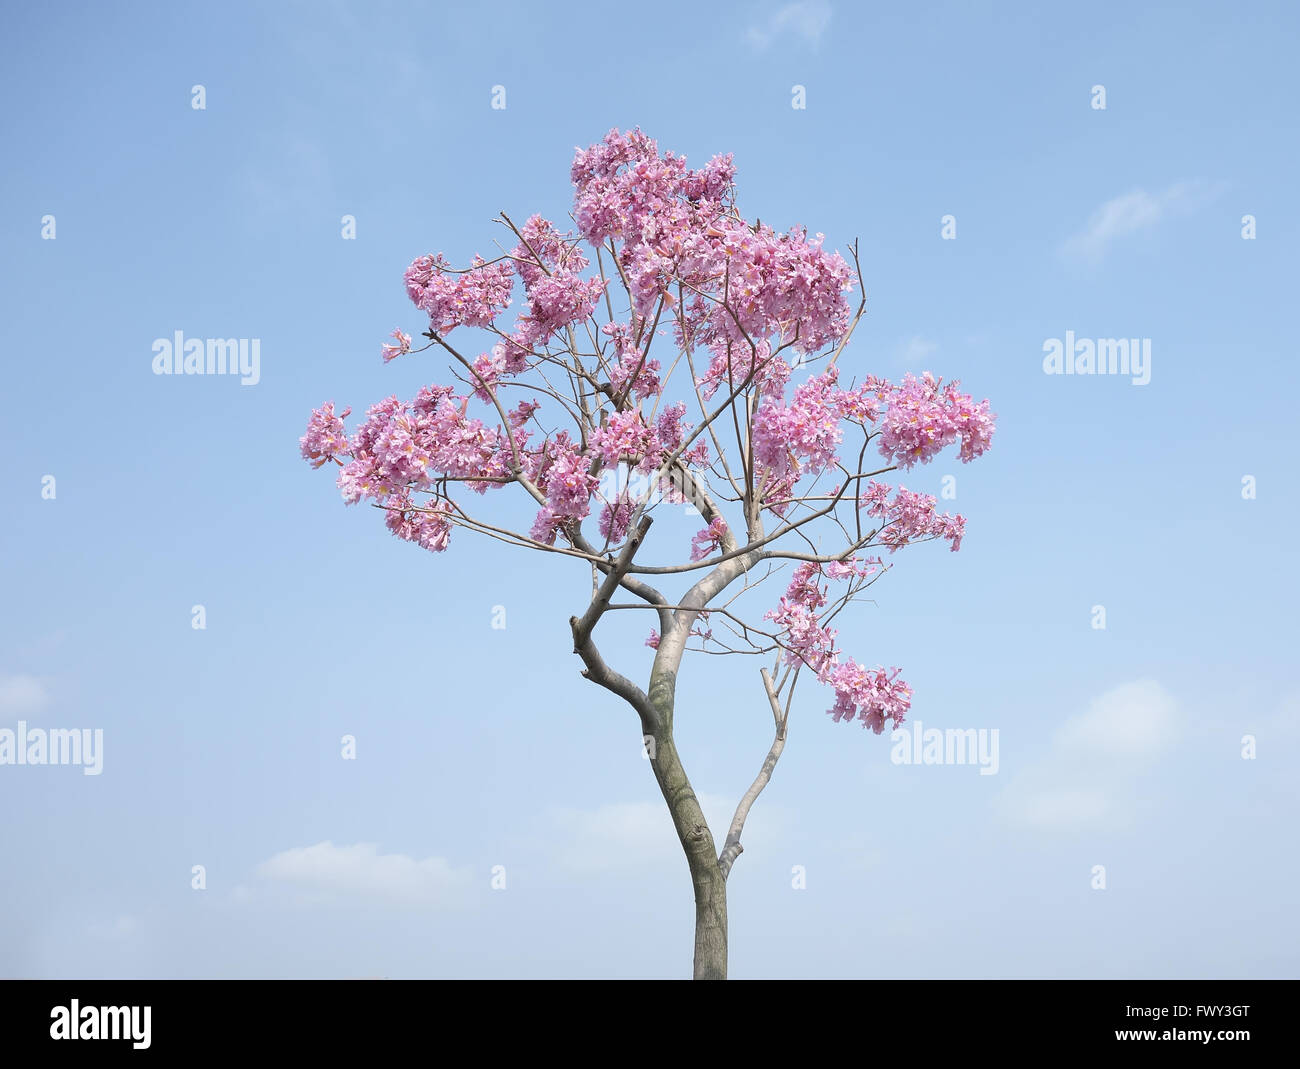 Tabebuia chrysotricha pink flowers blossom in spring Stock Photo